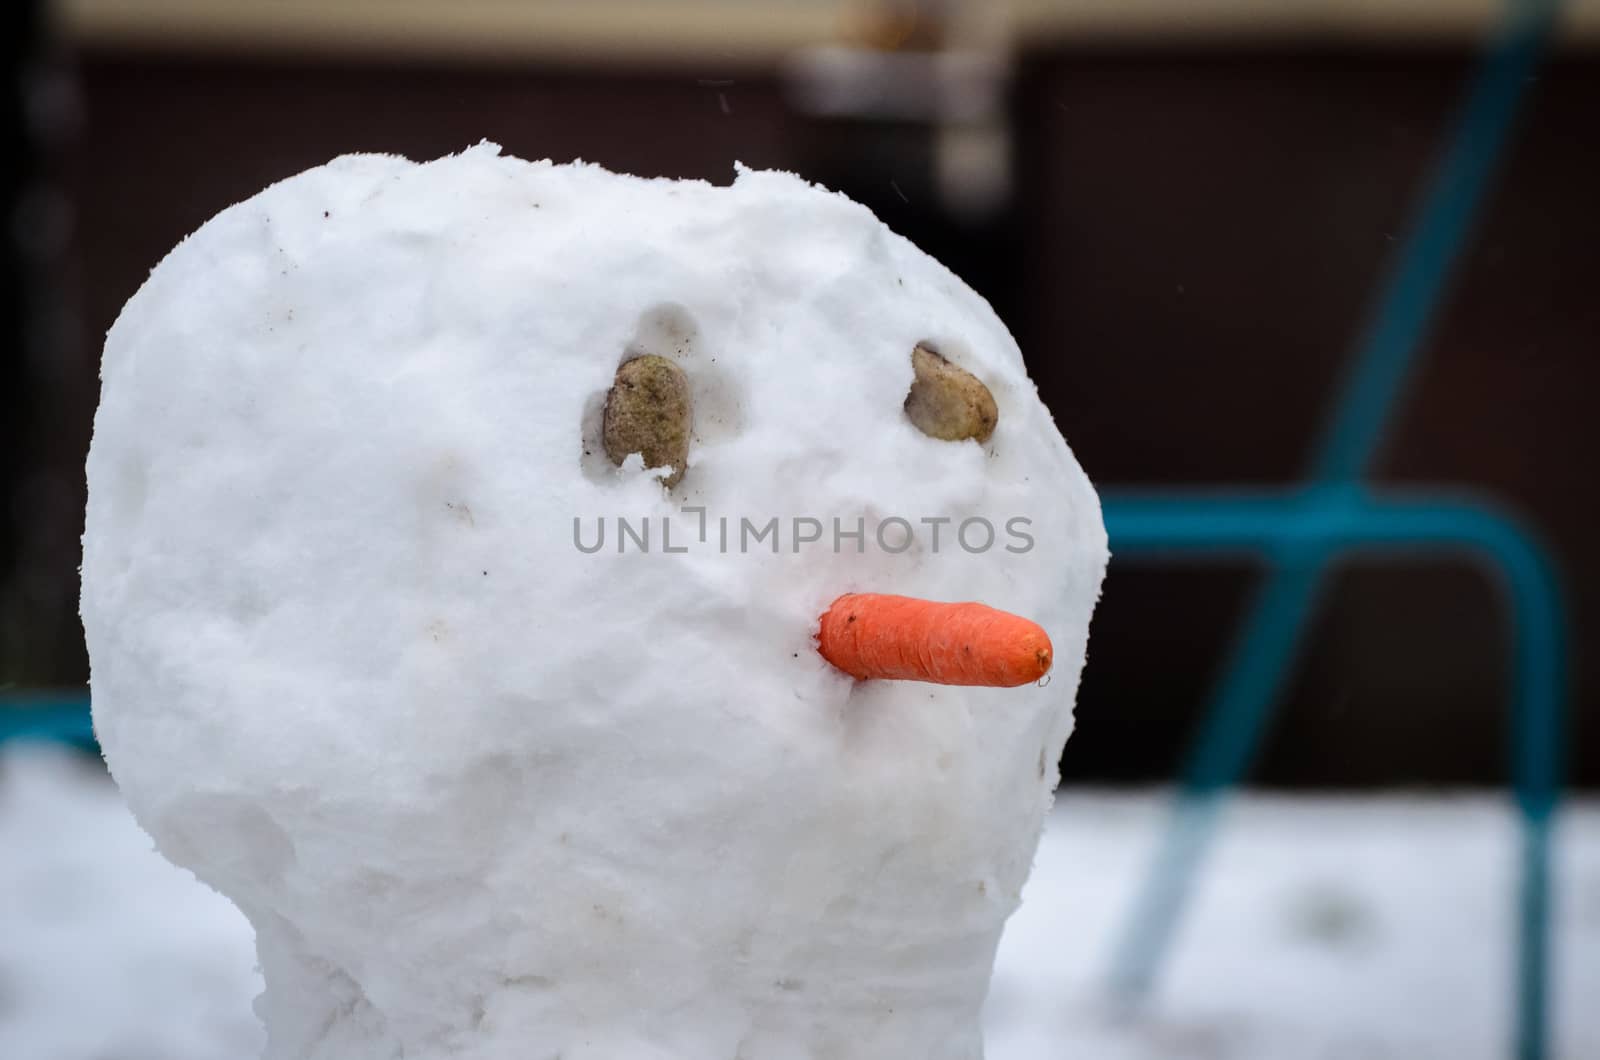 When it snows we build a snowman and use a carrot as a nose.